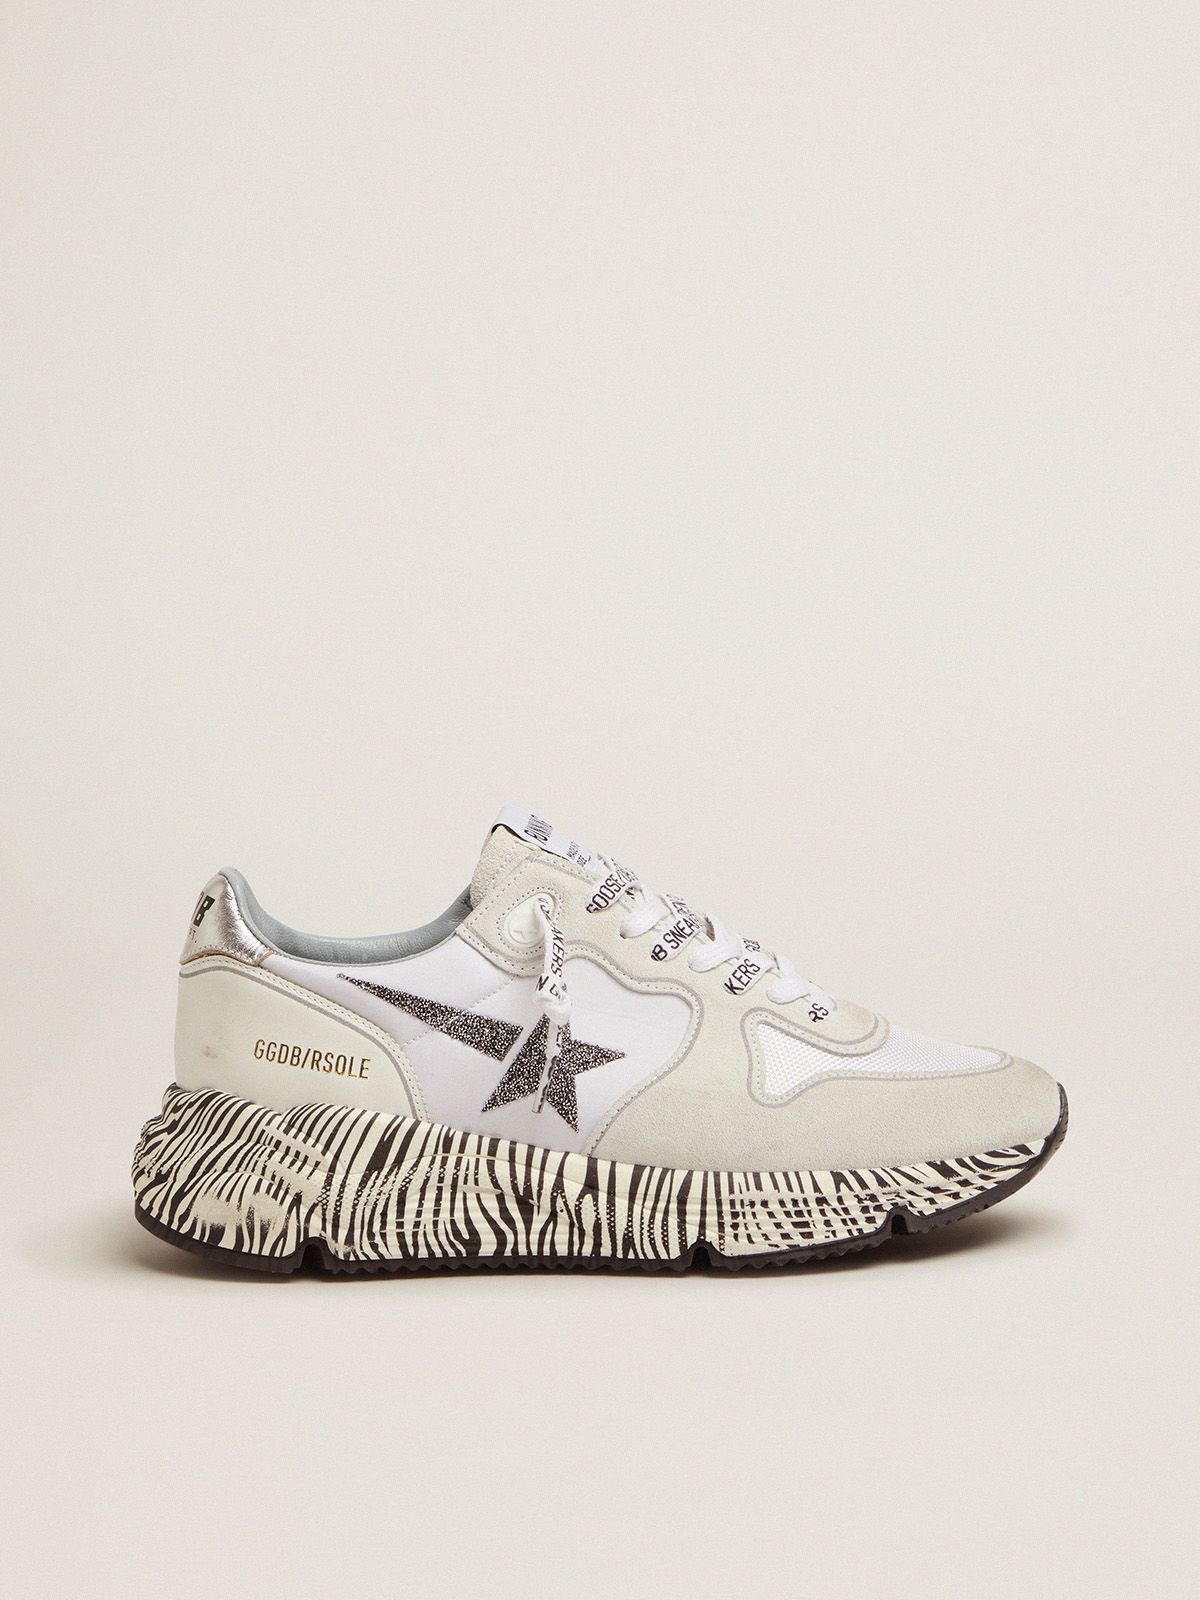 golden goose and sneakers Running with Sole crystals sole zebra-print